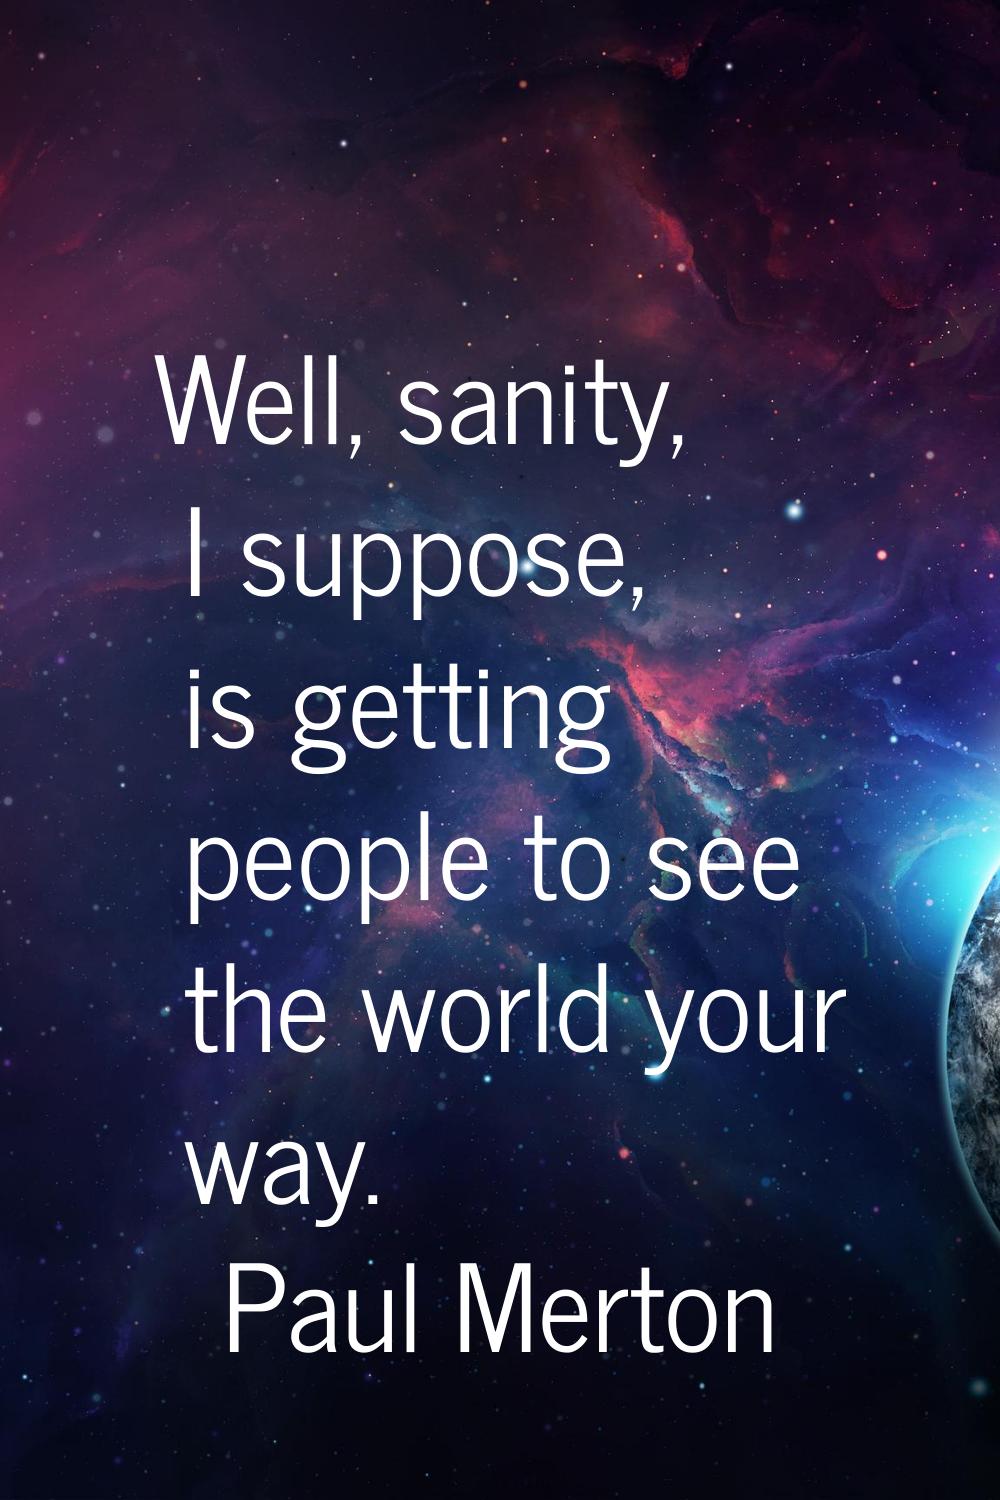 Well, sanity, I suppose, is getting people to see the world your way.